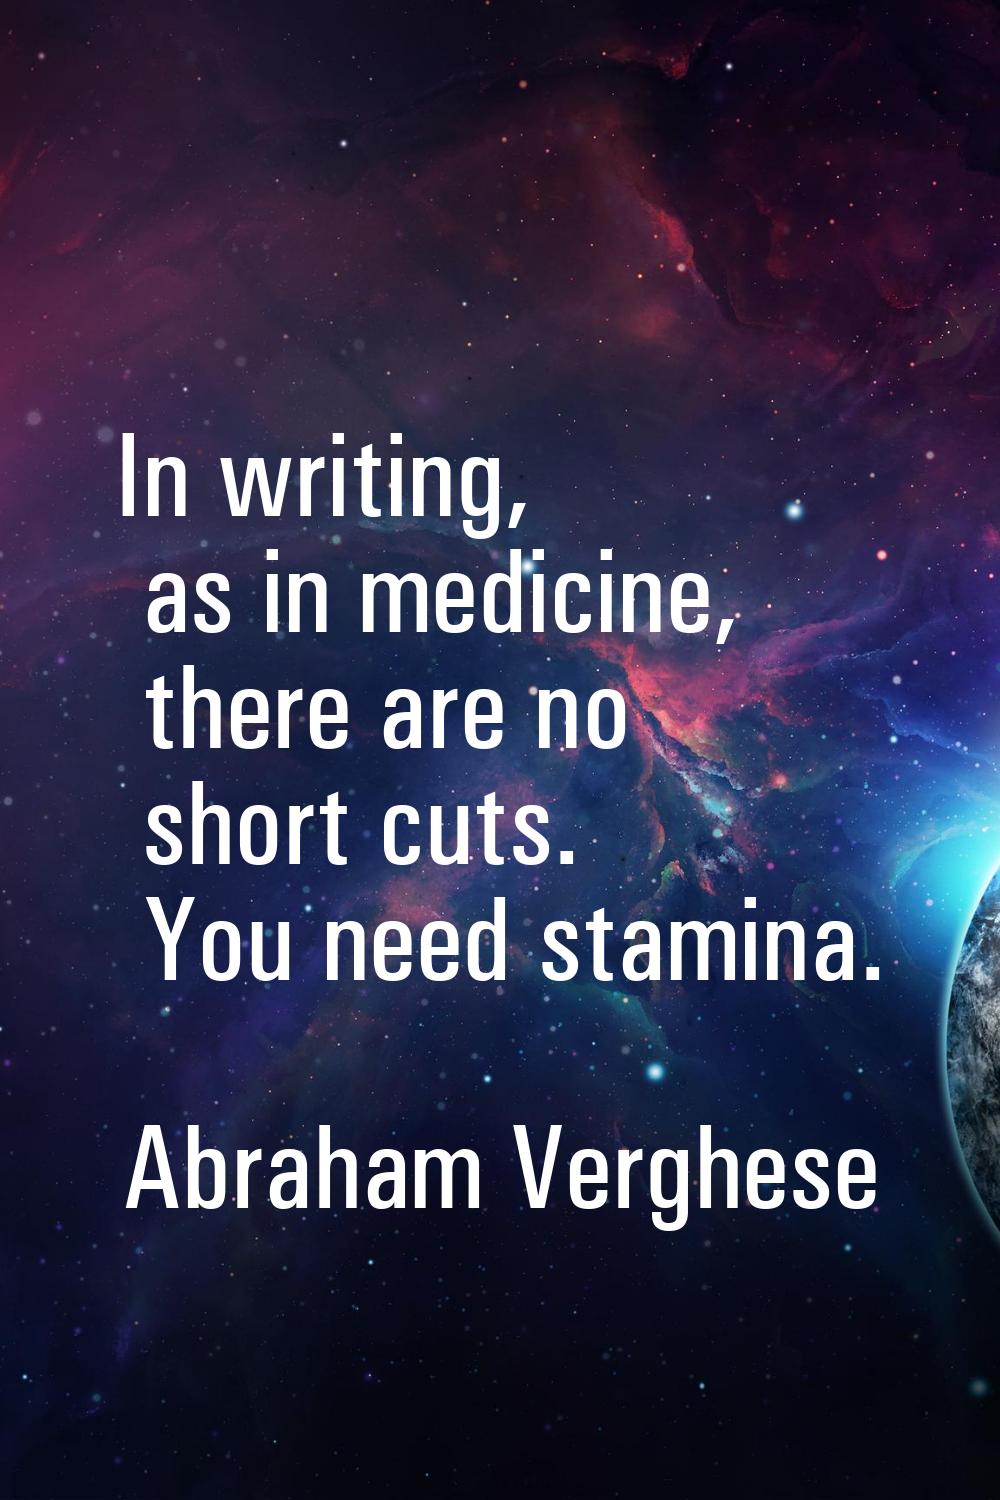 In writing, as in medicine, there are no short cuts. You need stamina.